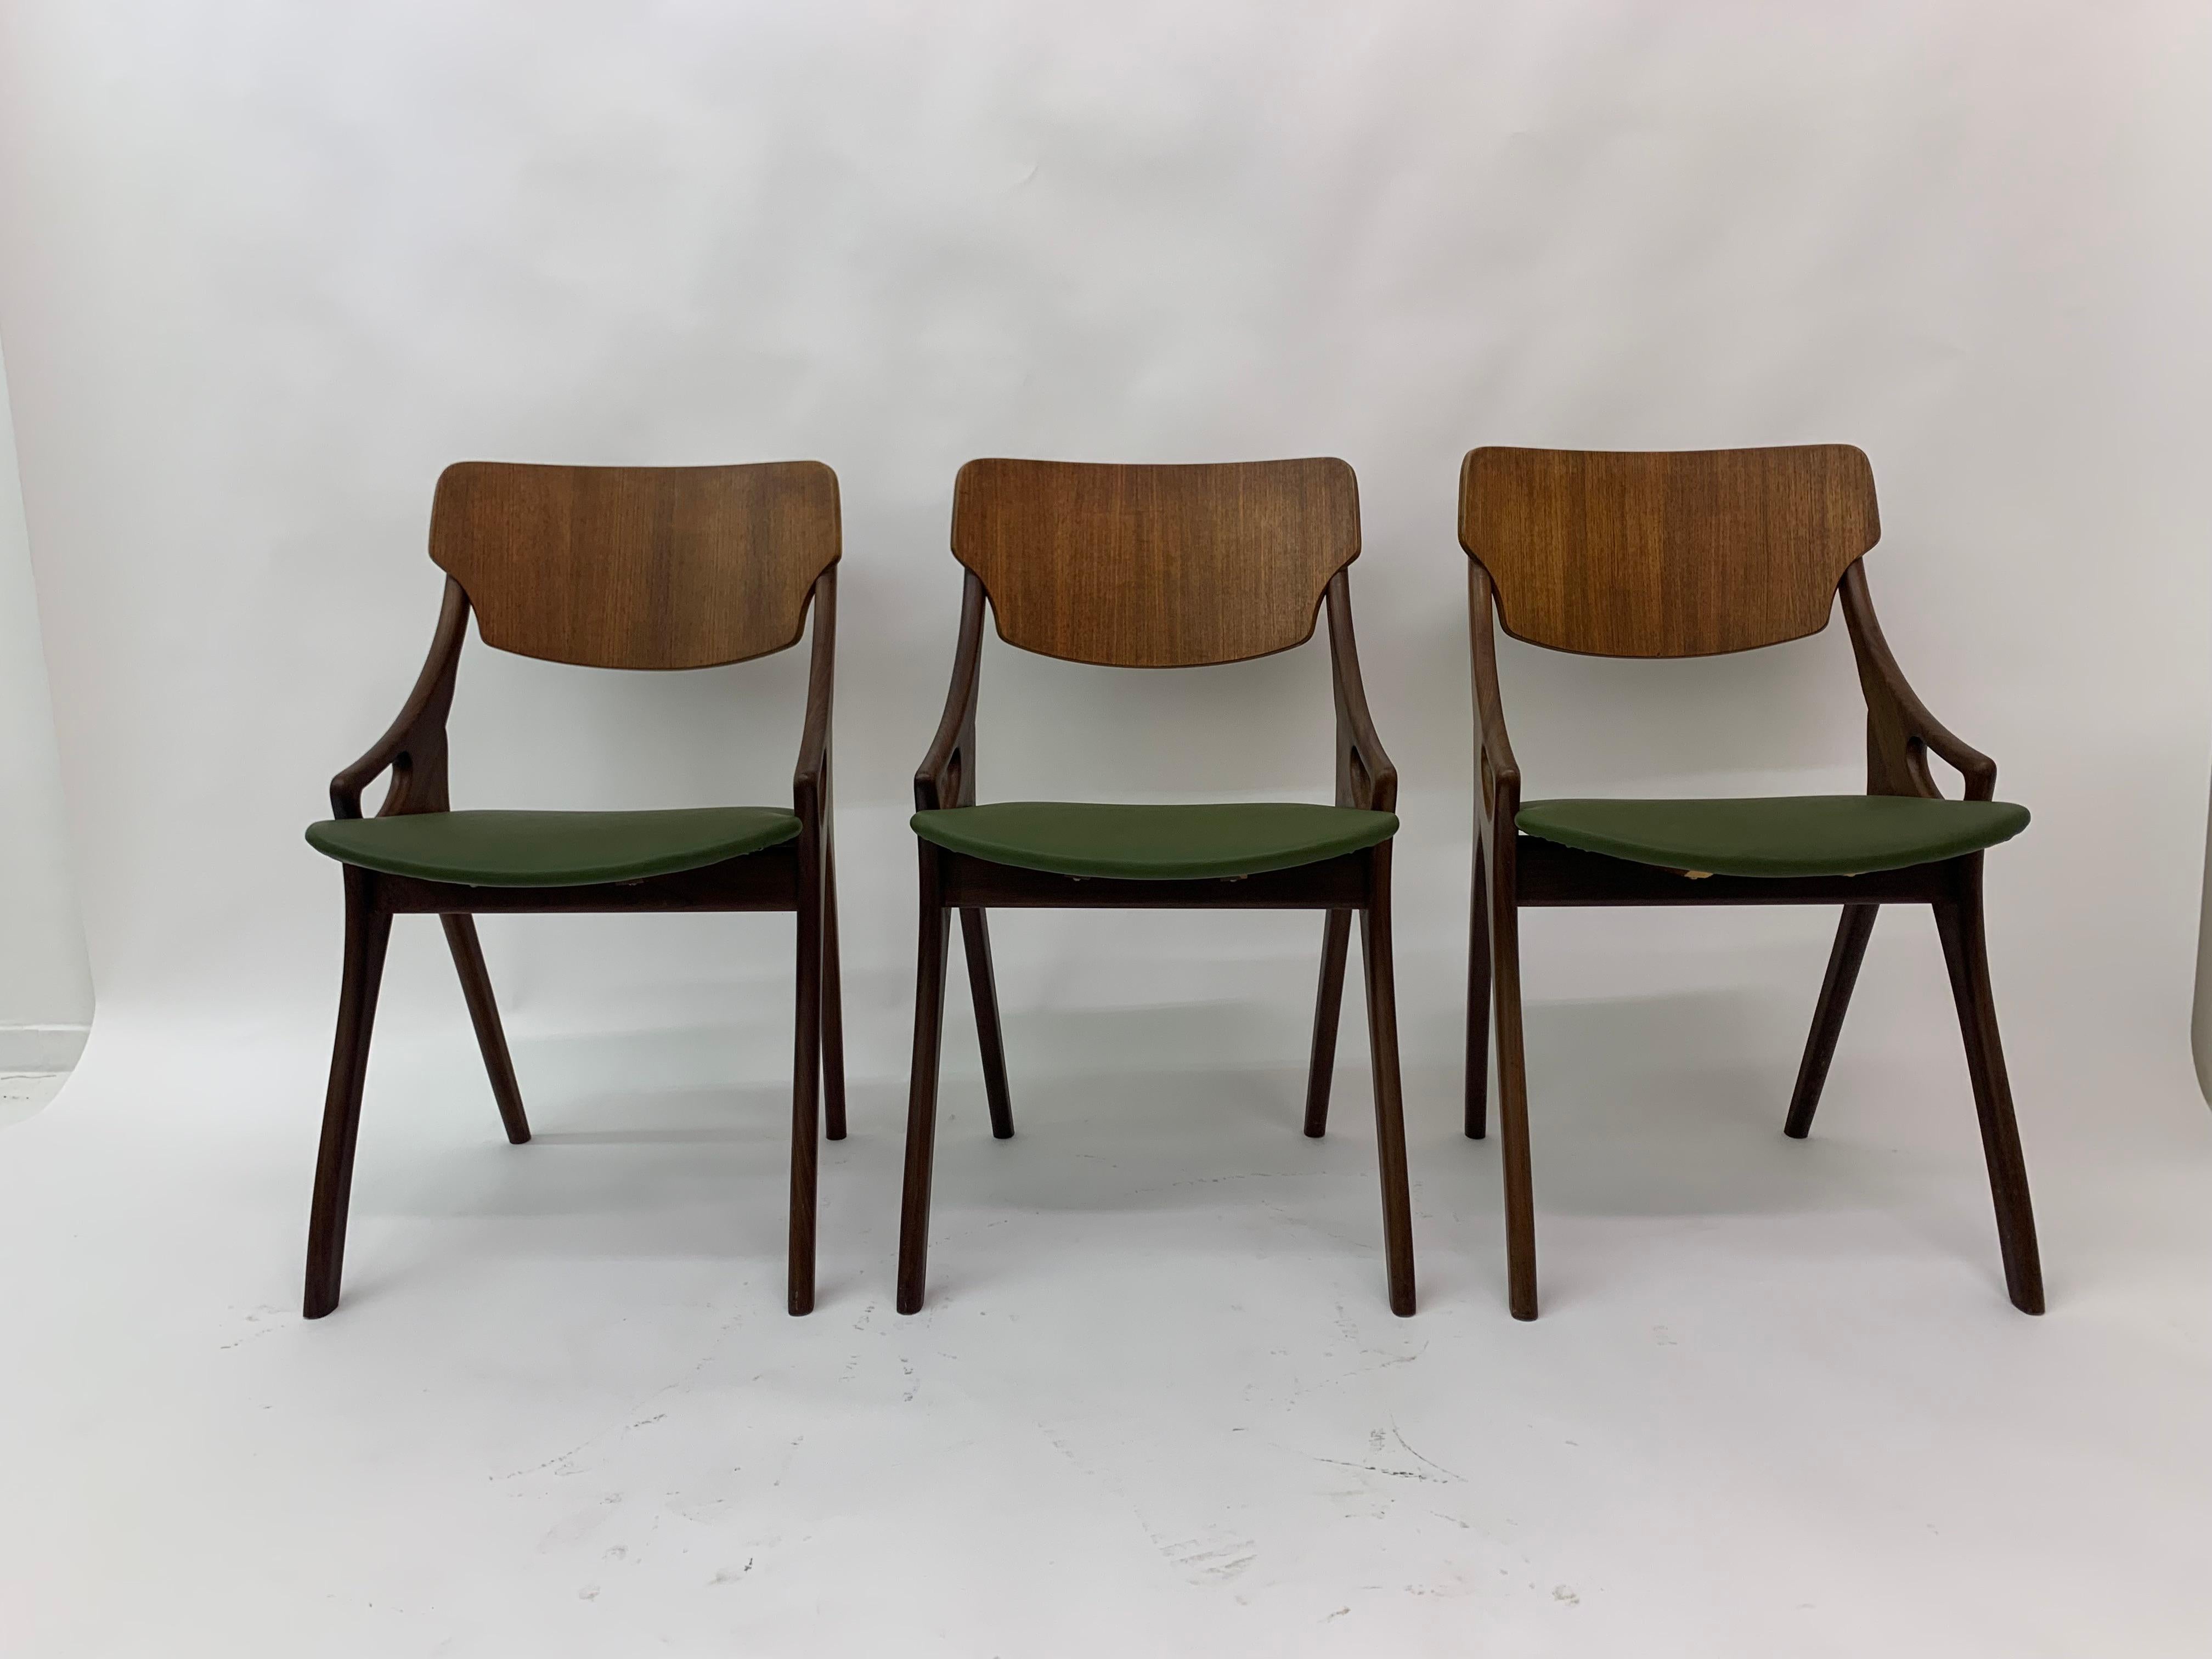 Set of 3 Danish Arne Hovmand Olsen Dining Chairs, 1950s In Good Condition For Sale In Delft, NL